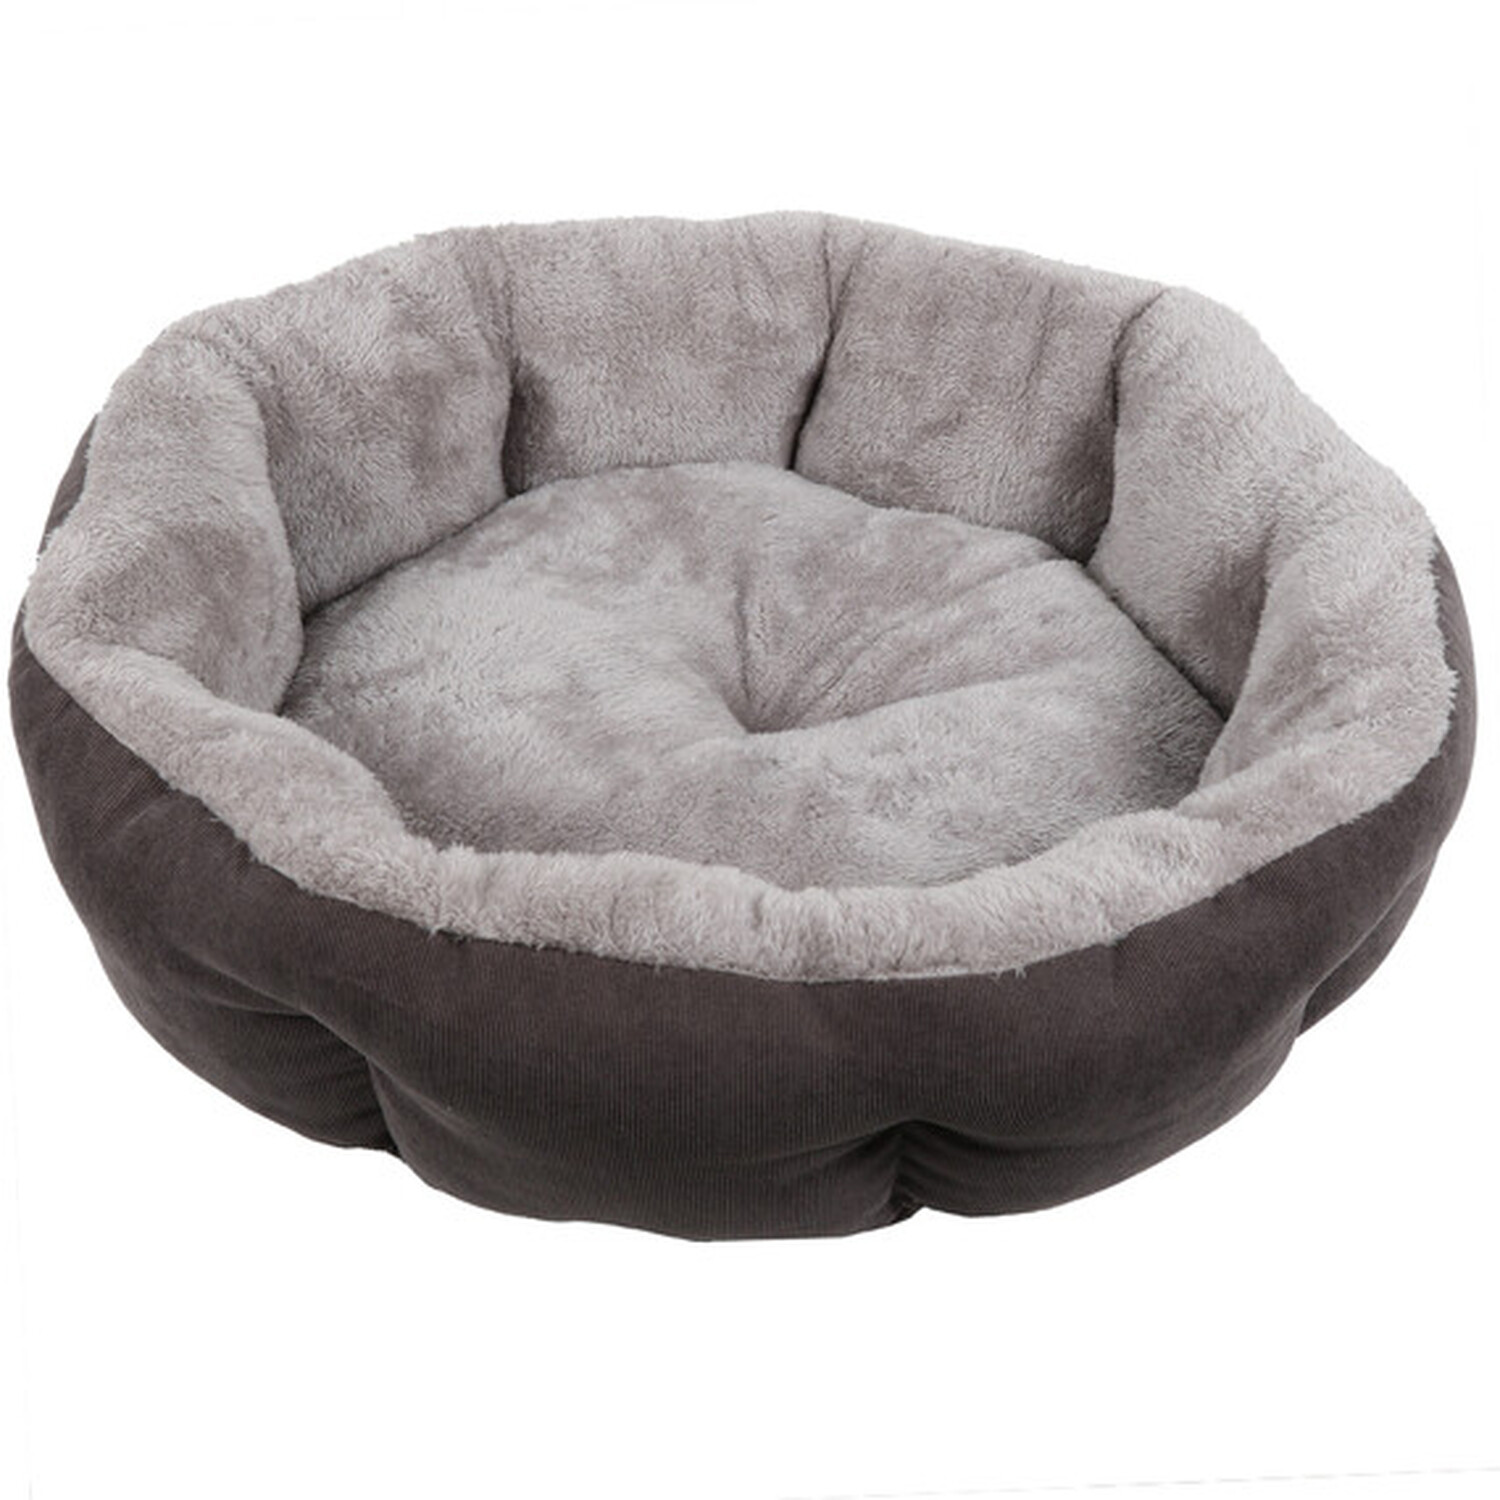 Clever Paws Cord Round Medium Pet Bed Image